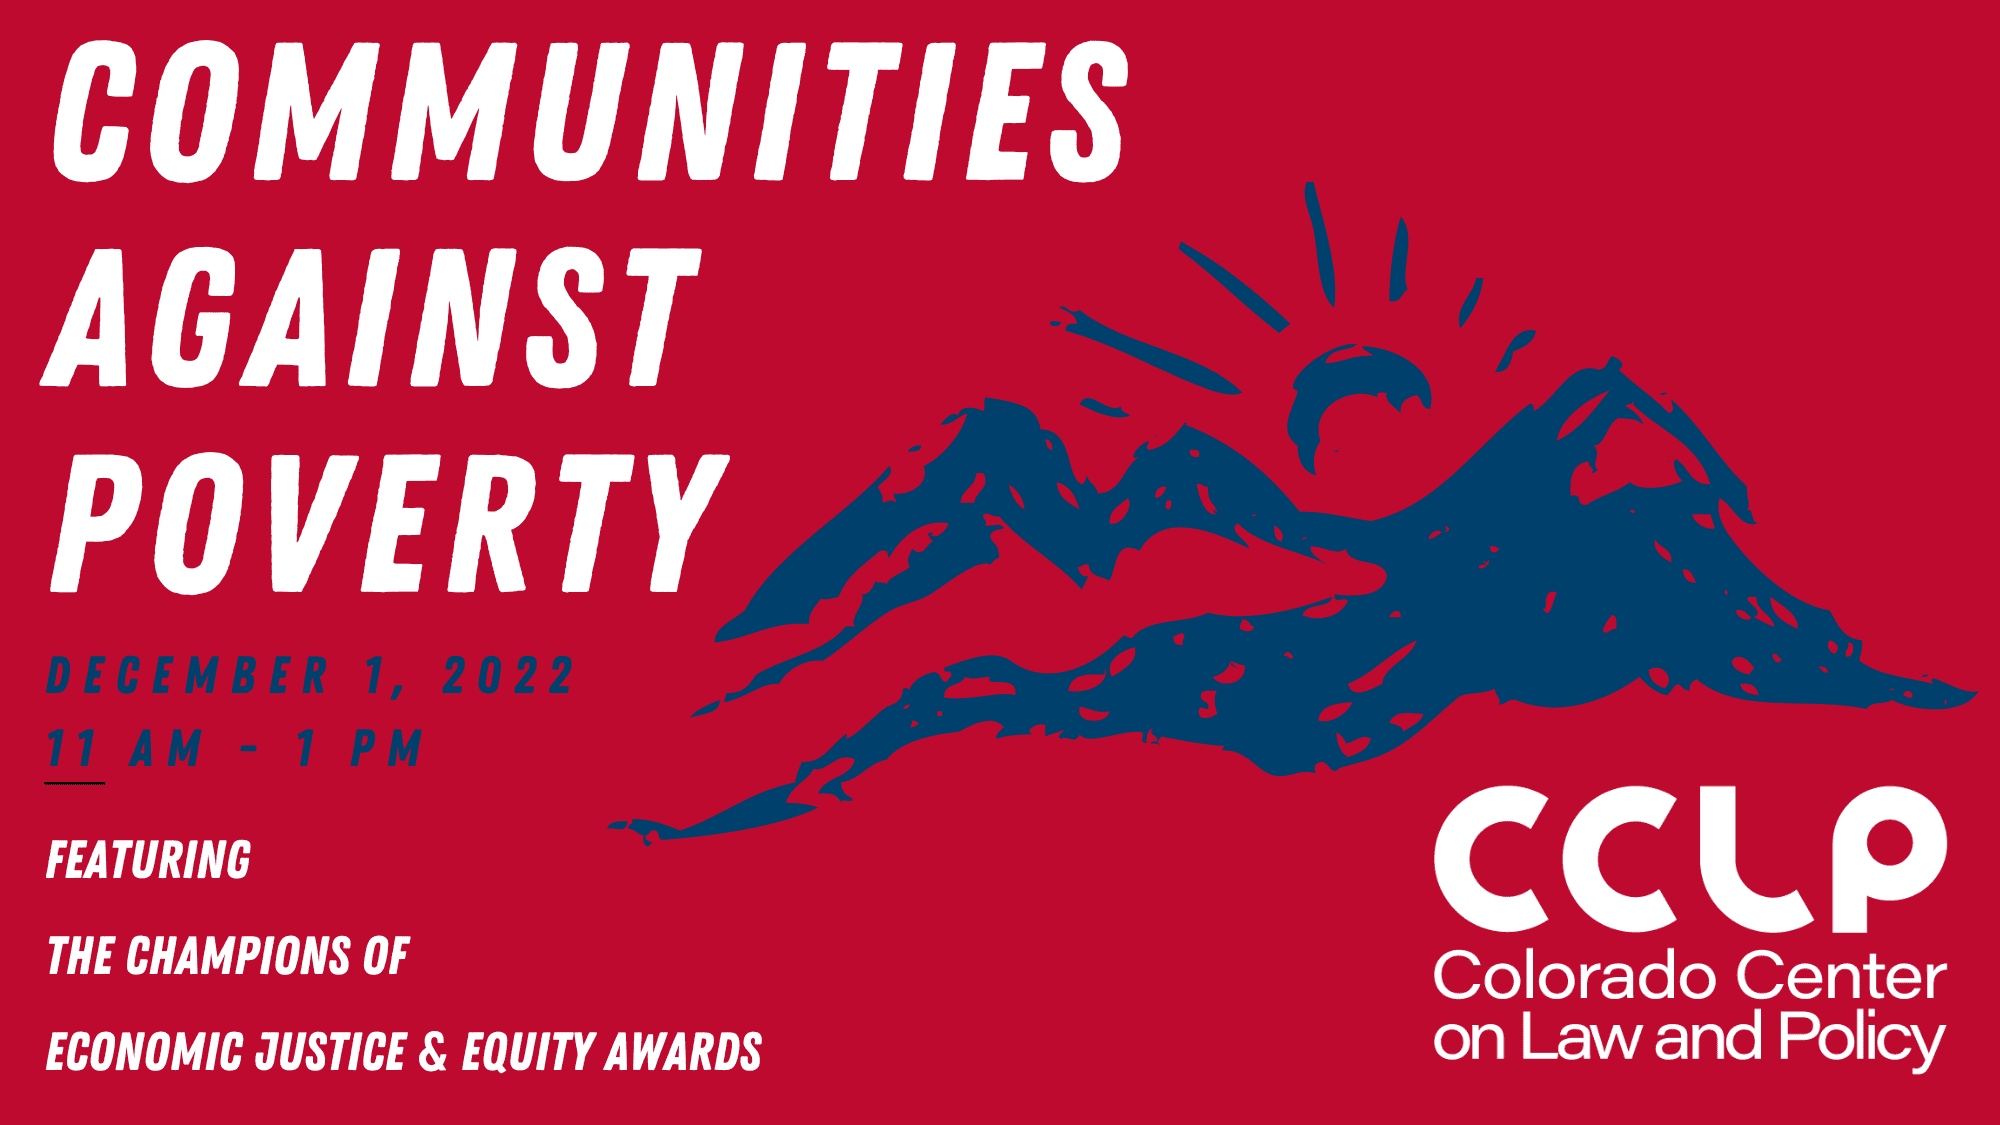 Communities Against Poverty 2022: December 1, 2022, 11 AM - 1 PM, featuring the Champions of Economic Justice & Equity Awards